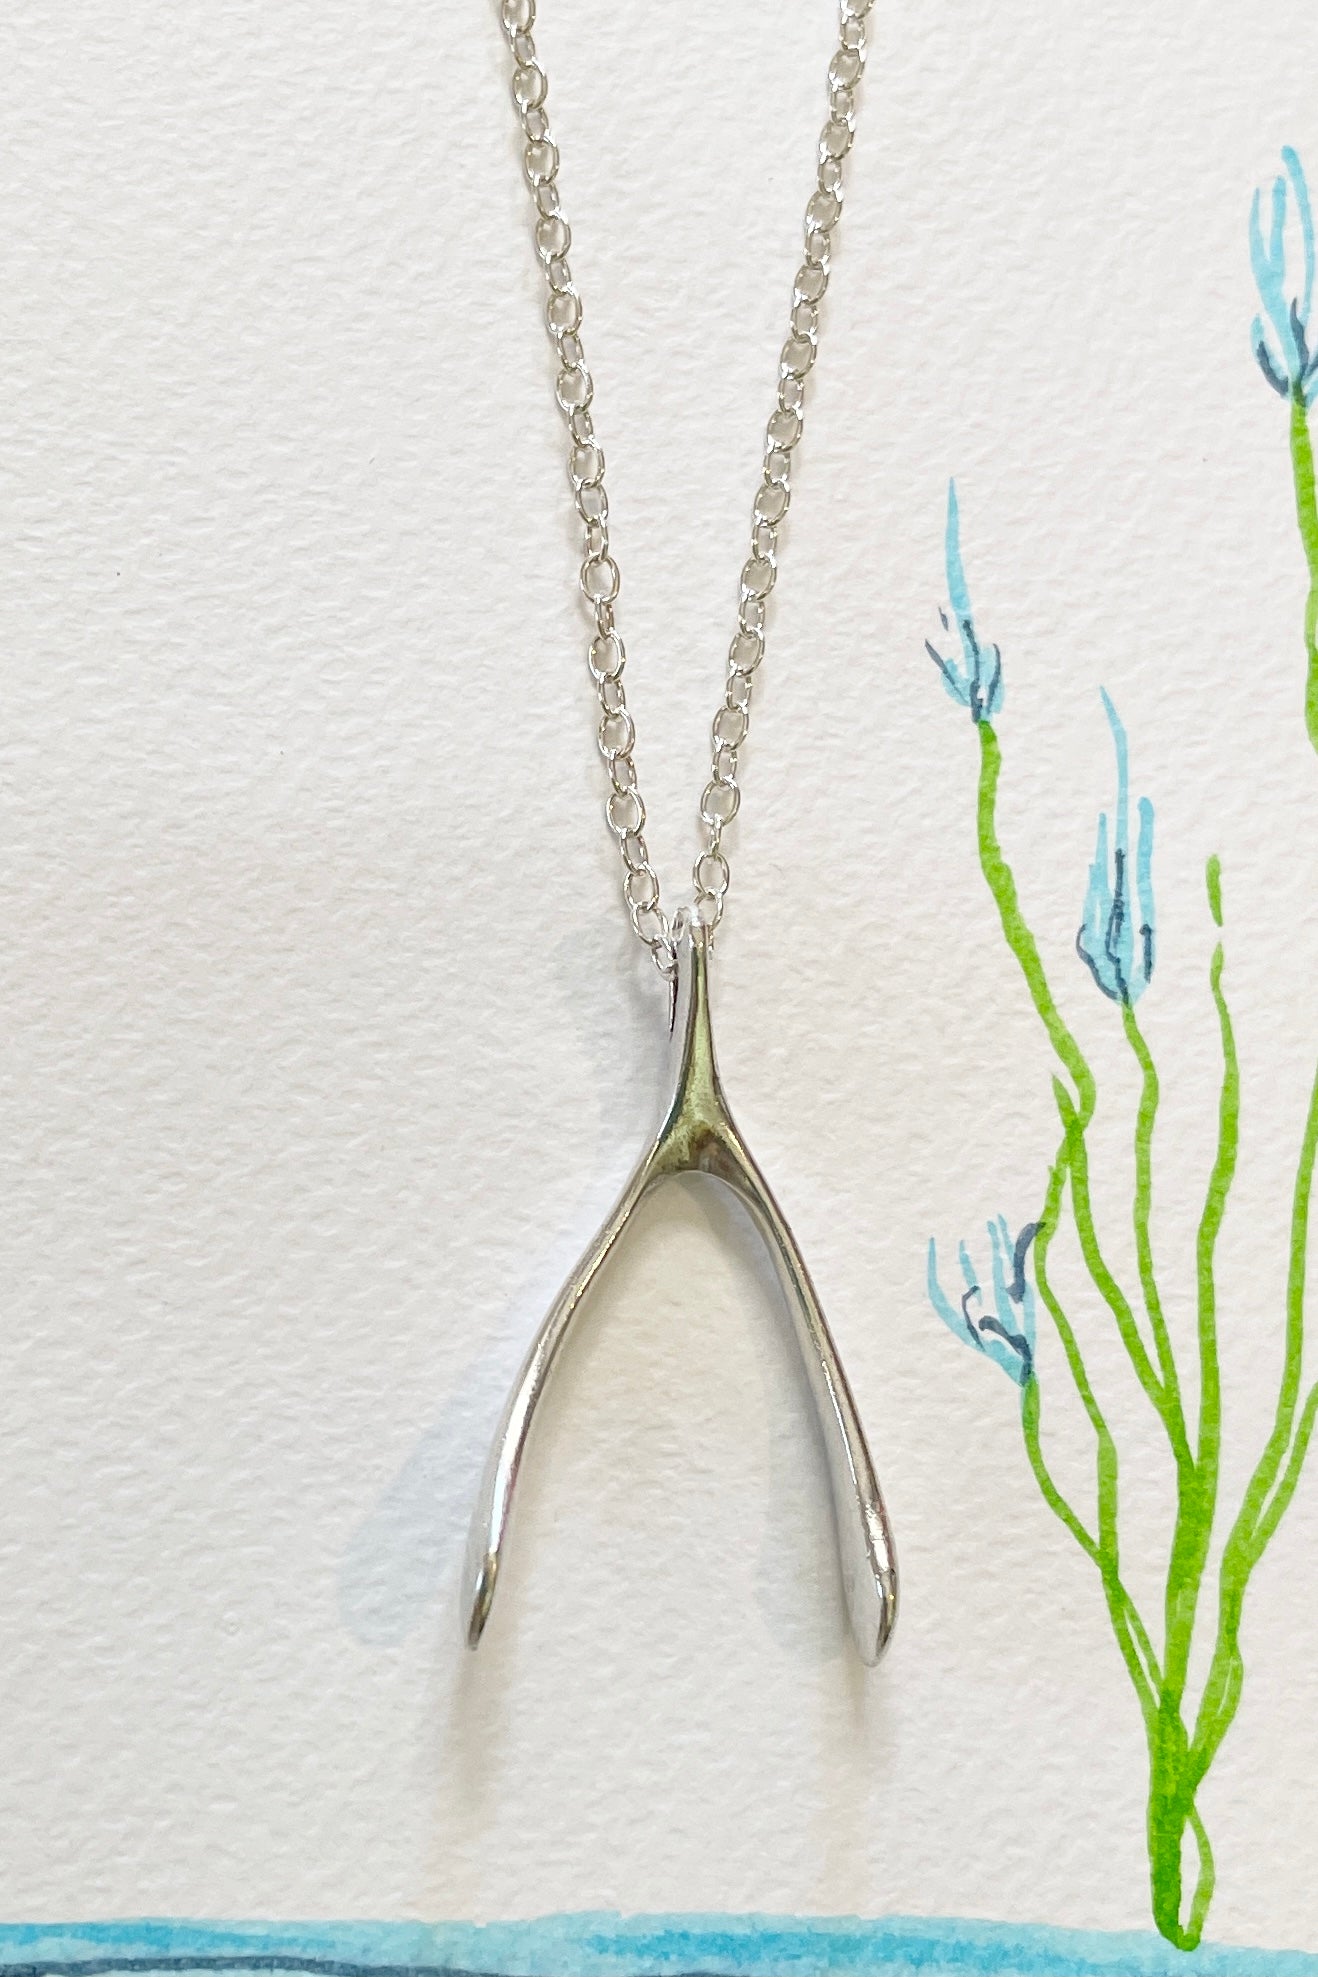 Silver Wishbone Necklace Life Size Solid Sterling Silver Wishbone Pendant  Necklace Moon Raven Designs Jewelry for Wish - Etsy | Wishbone pendant, Wishbone  pendant necklace, Wishbone necklace silver